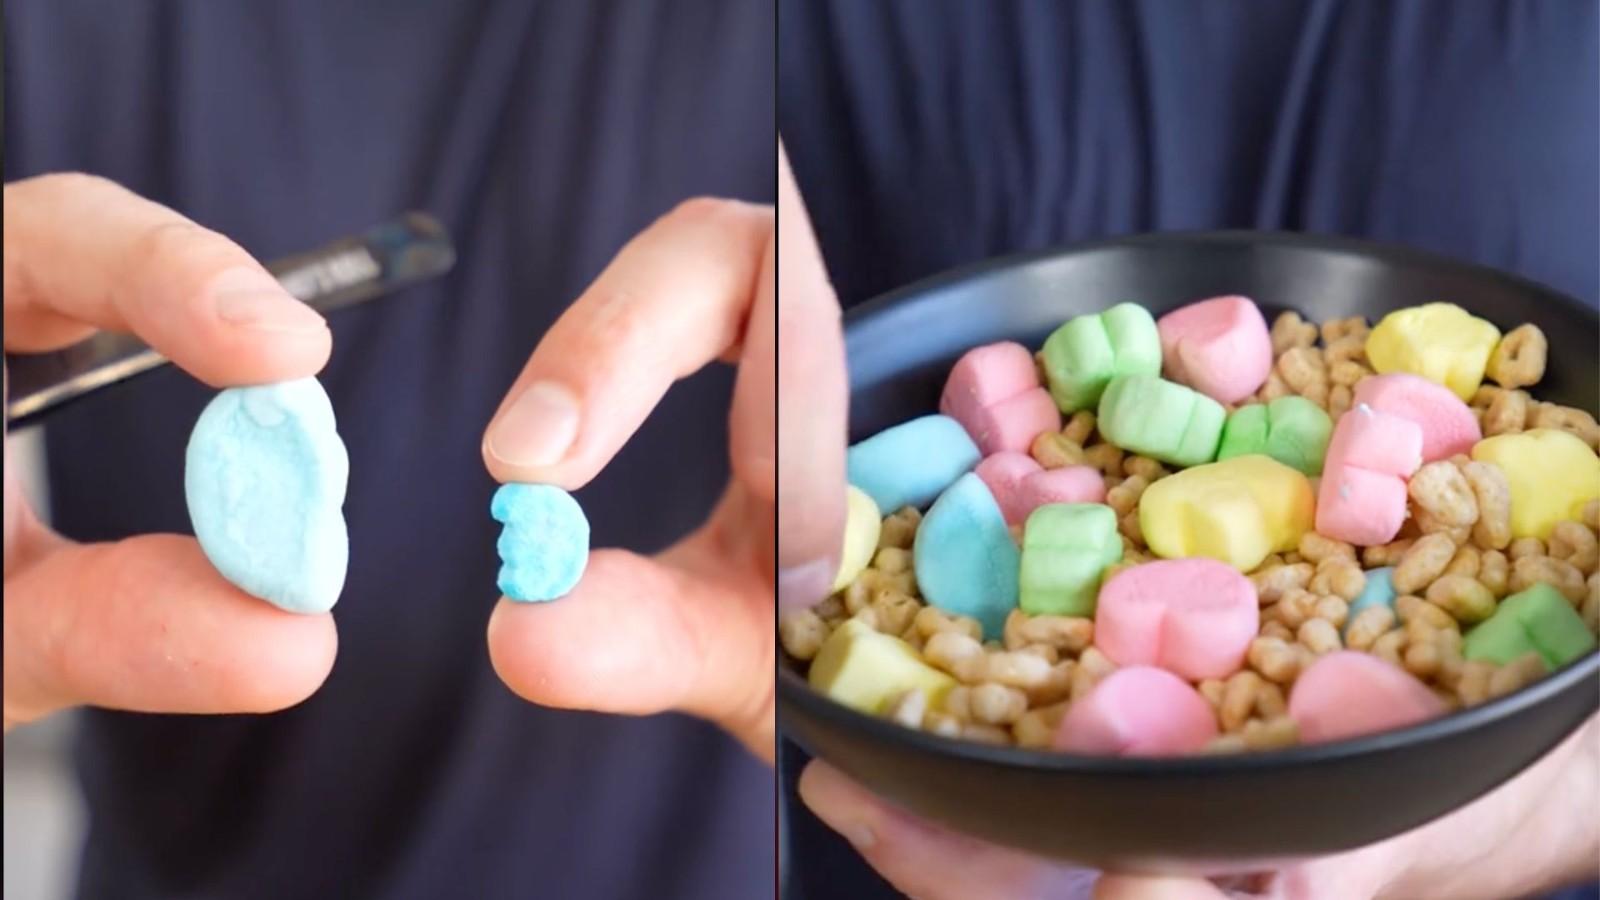 A photo of lucky charms marshmallows